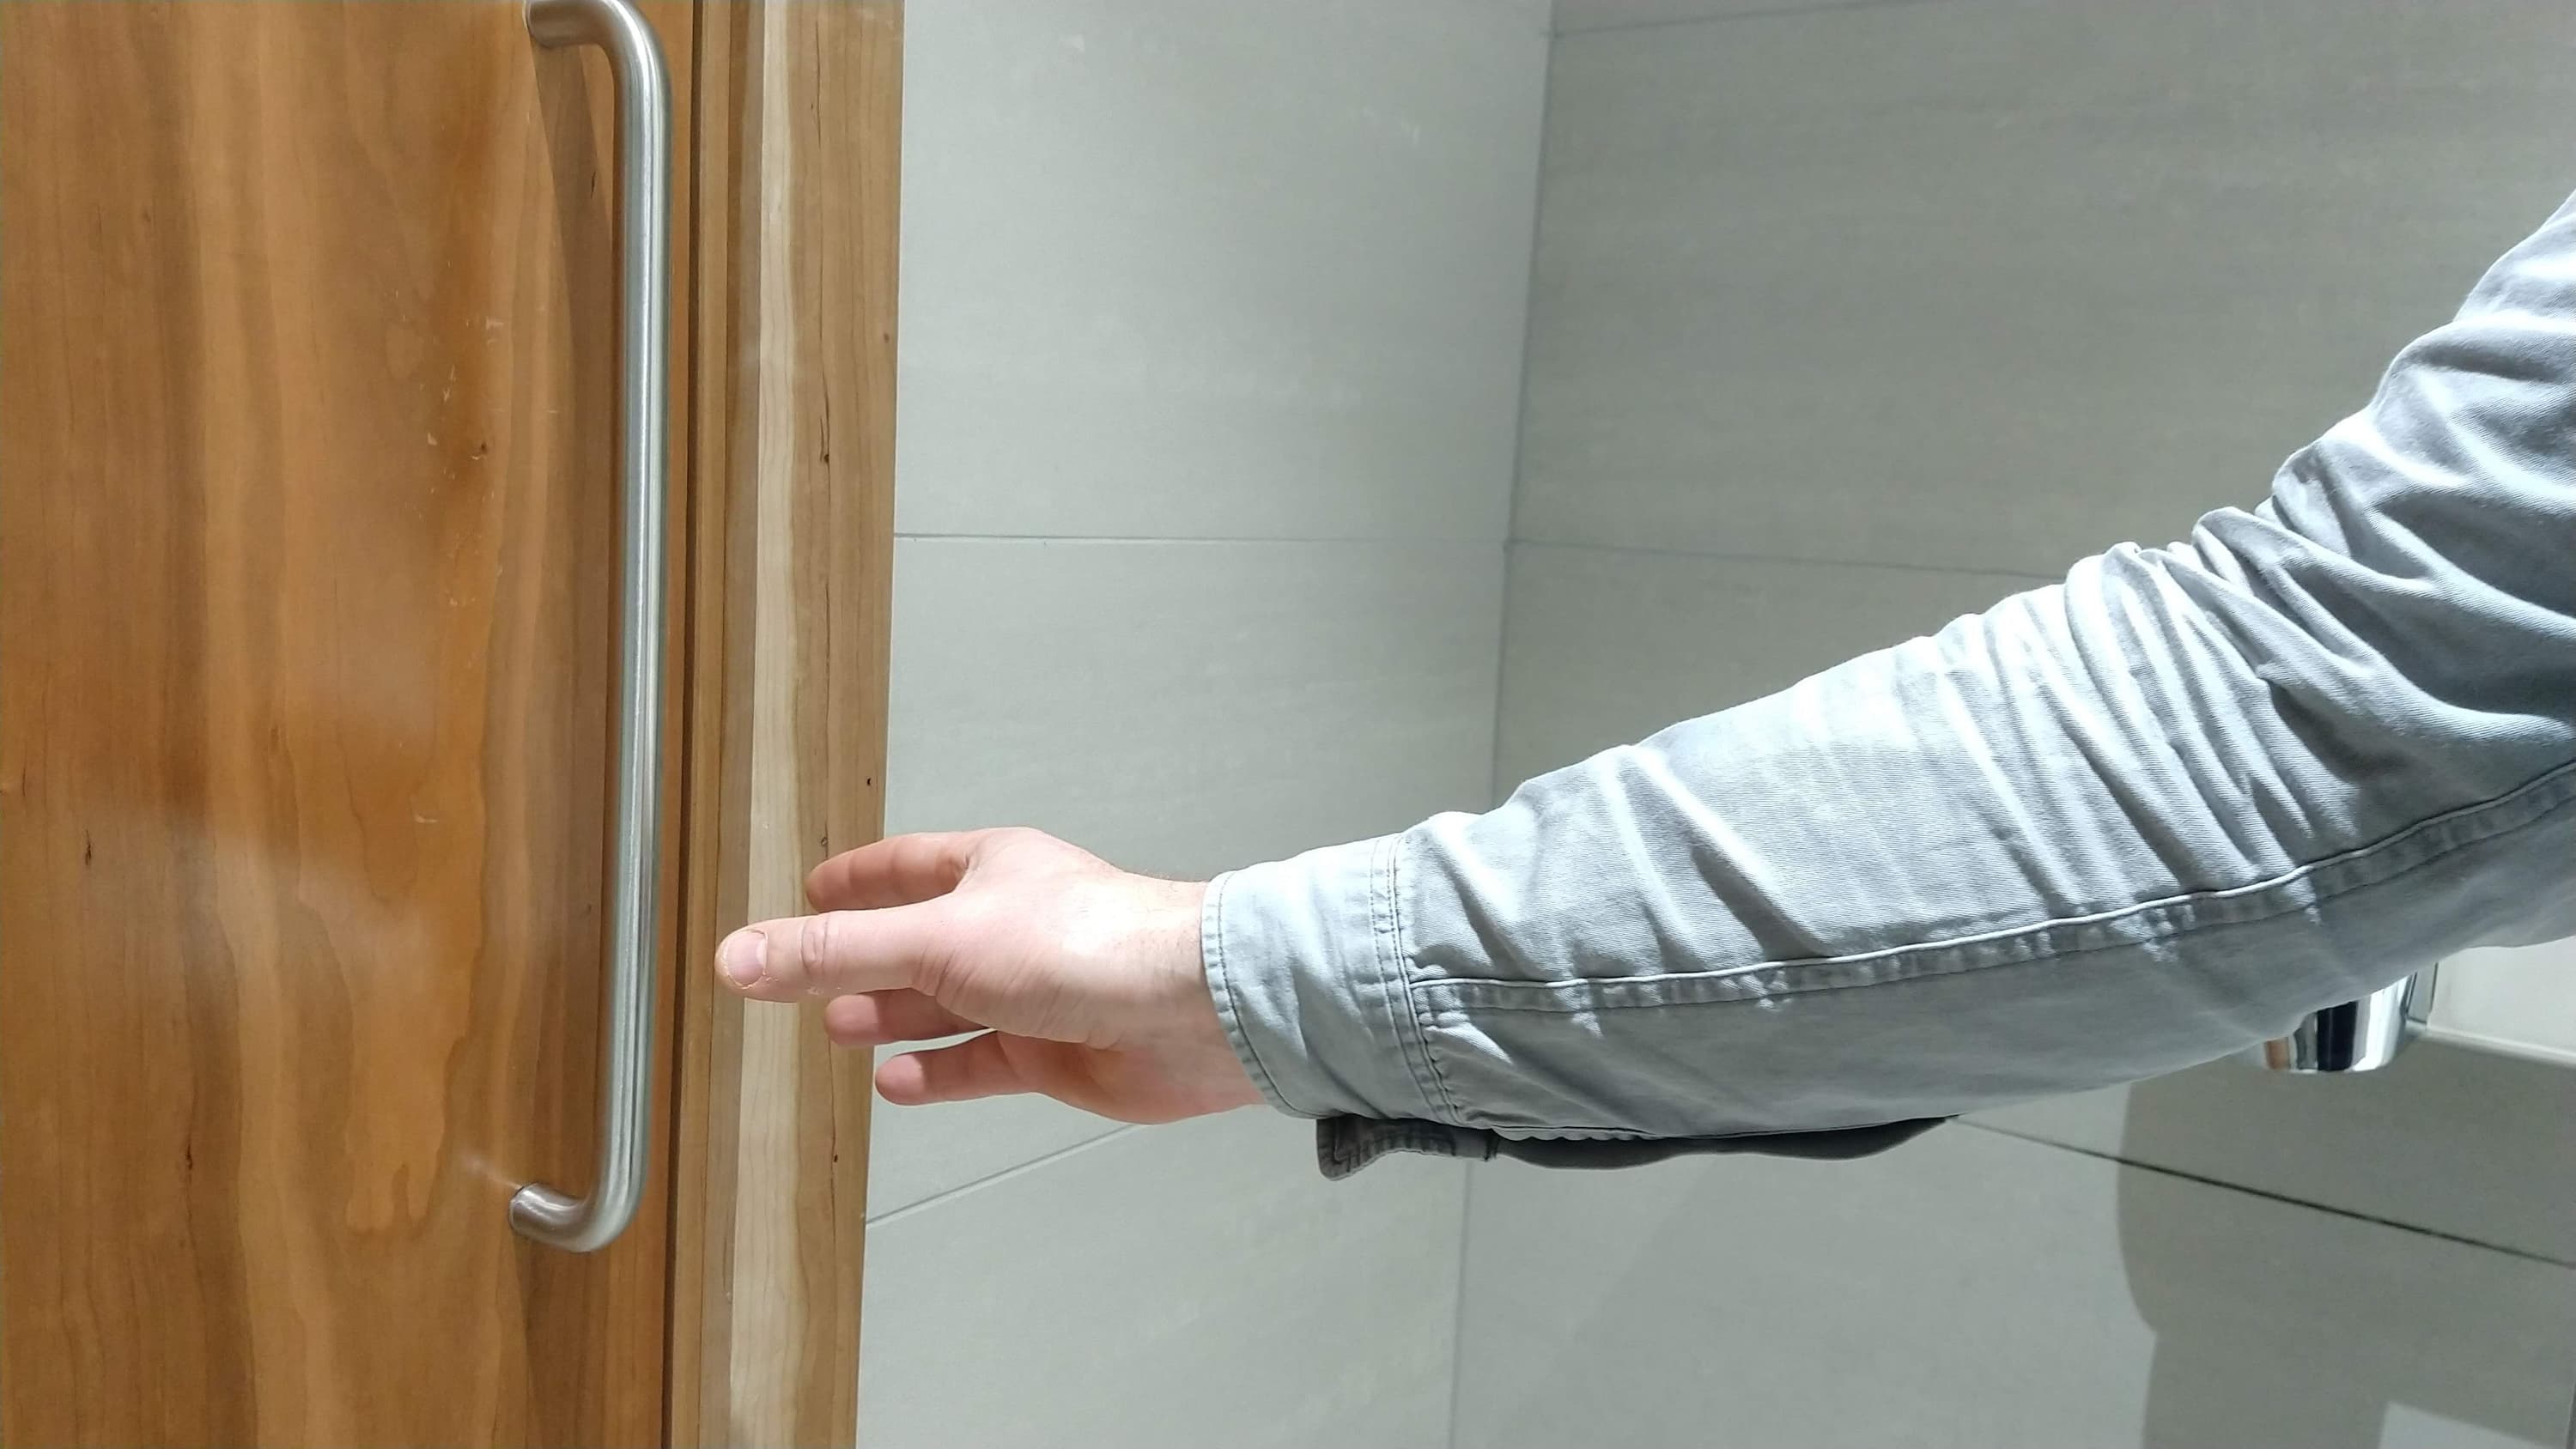 A man’s hand reaching out to grab a door handle